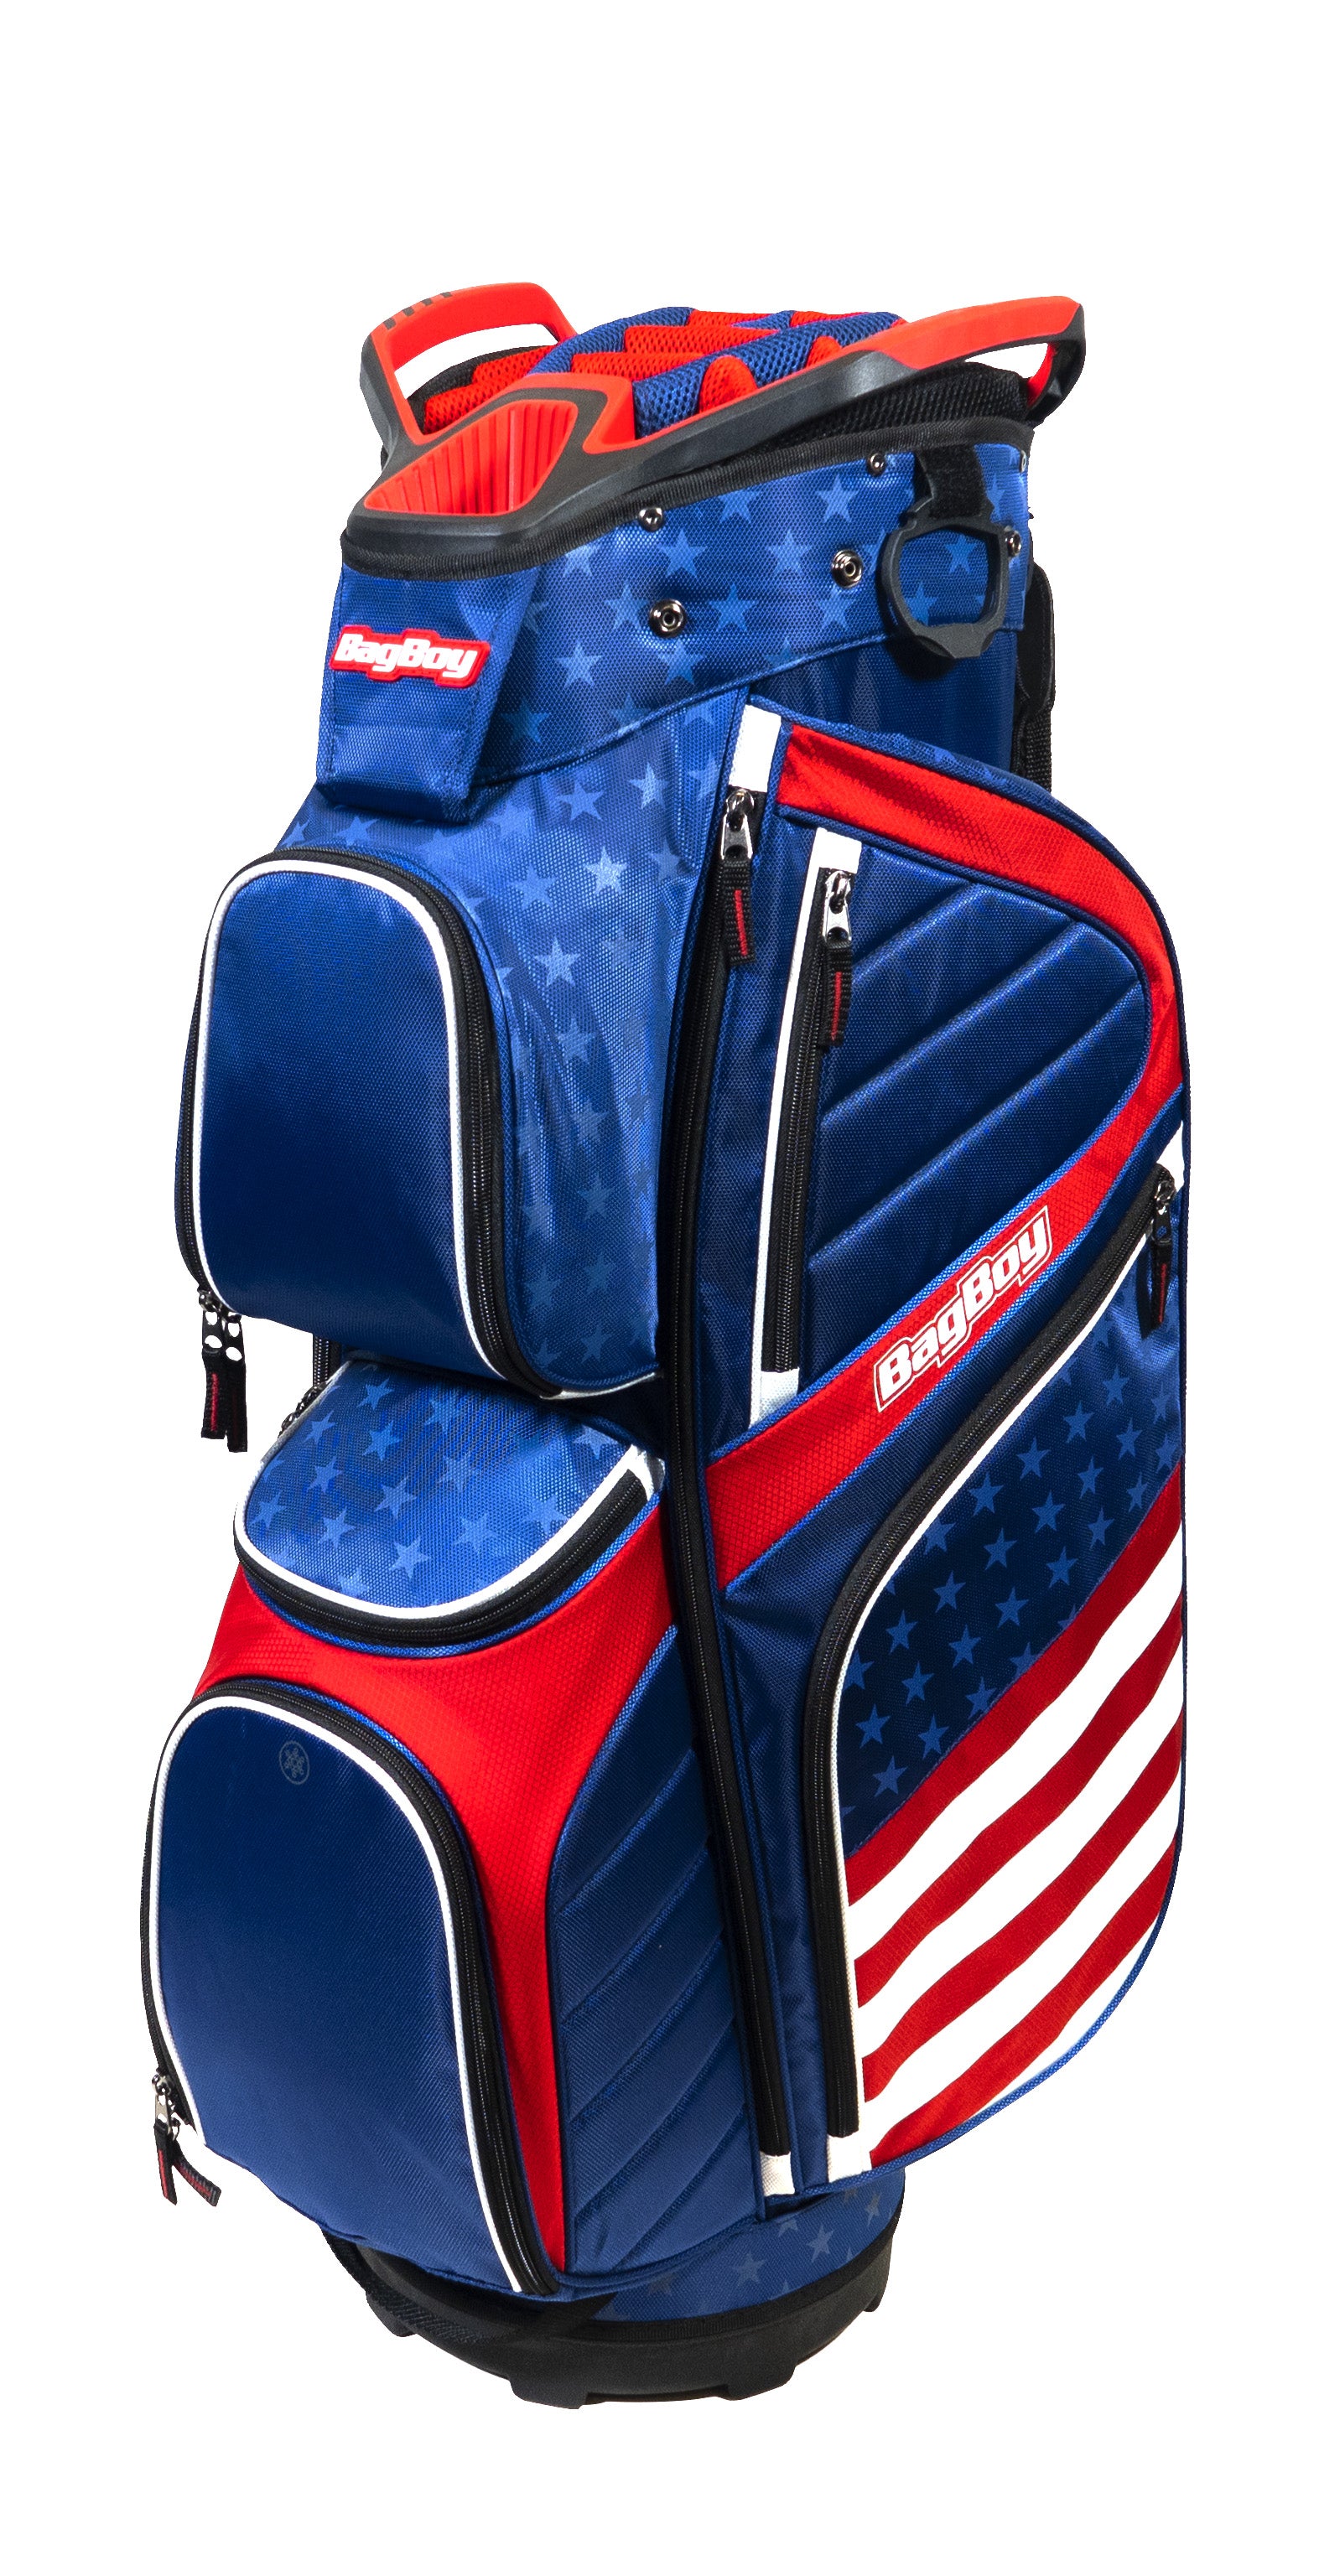 New USA Limited Edition Bags Now Available  Bag Boy Bags Exhibit Patriotic Theme